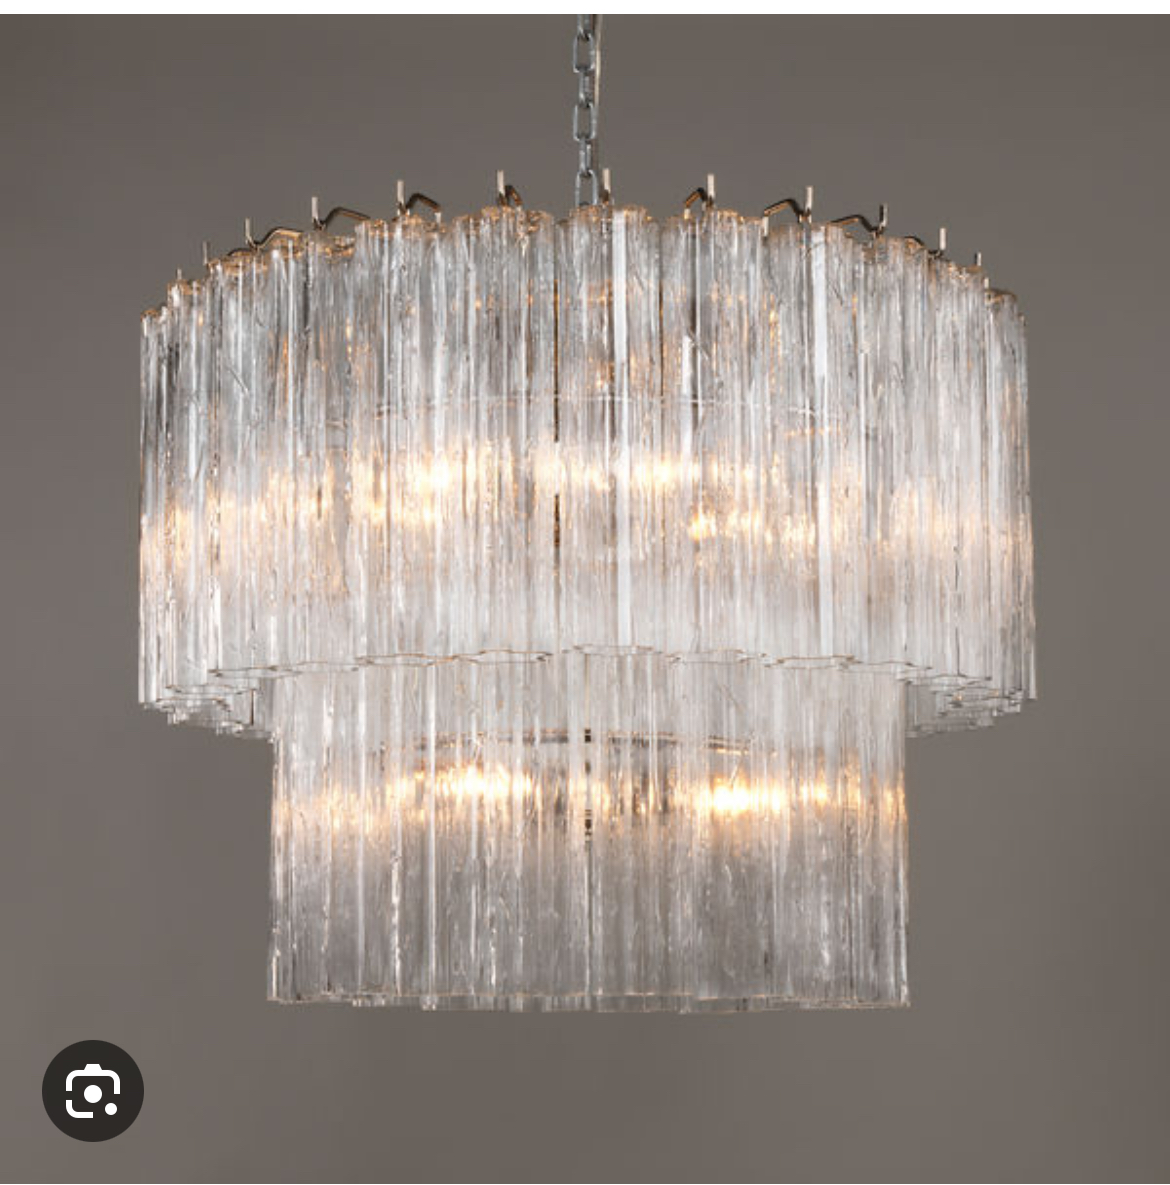 A Lymington chandelier by Vaughan Designs (one shade damaged)